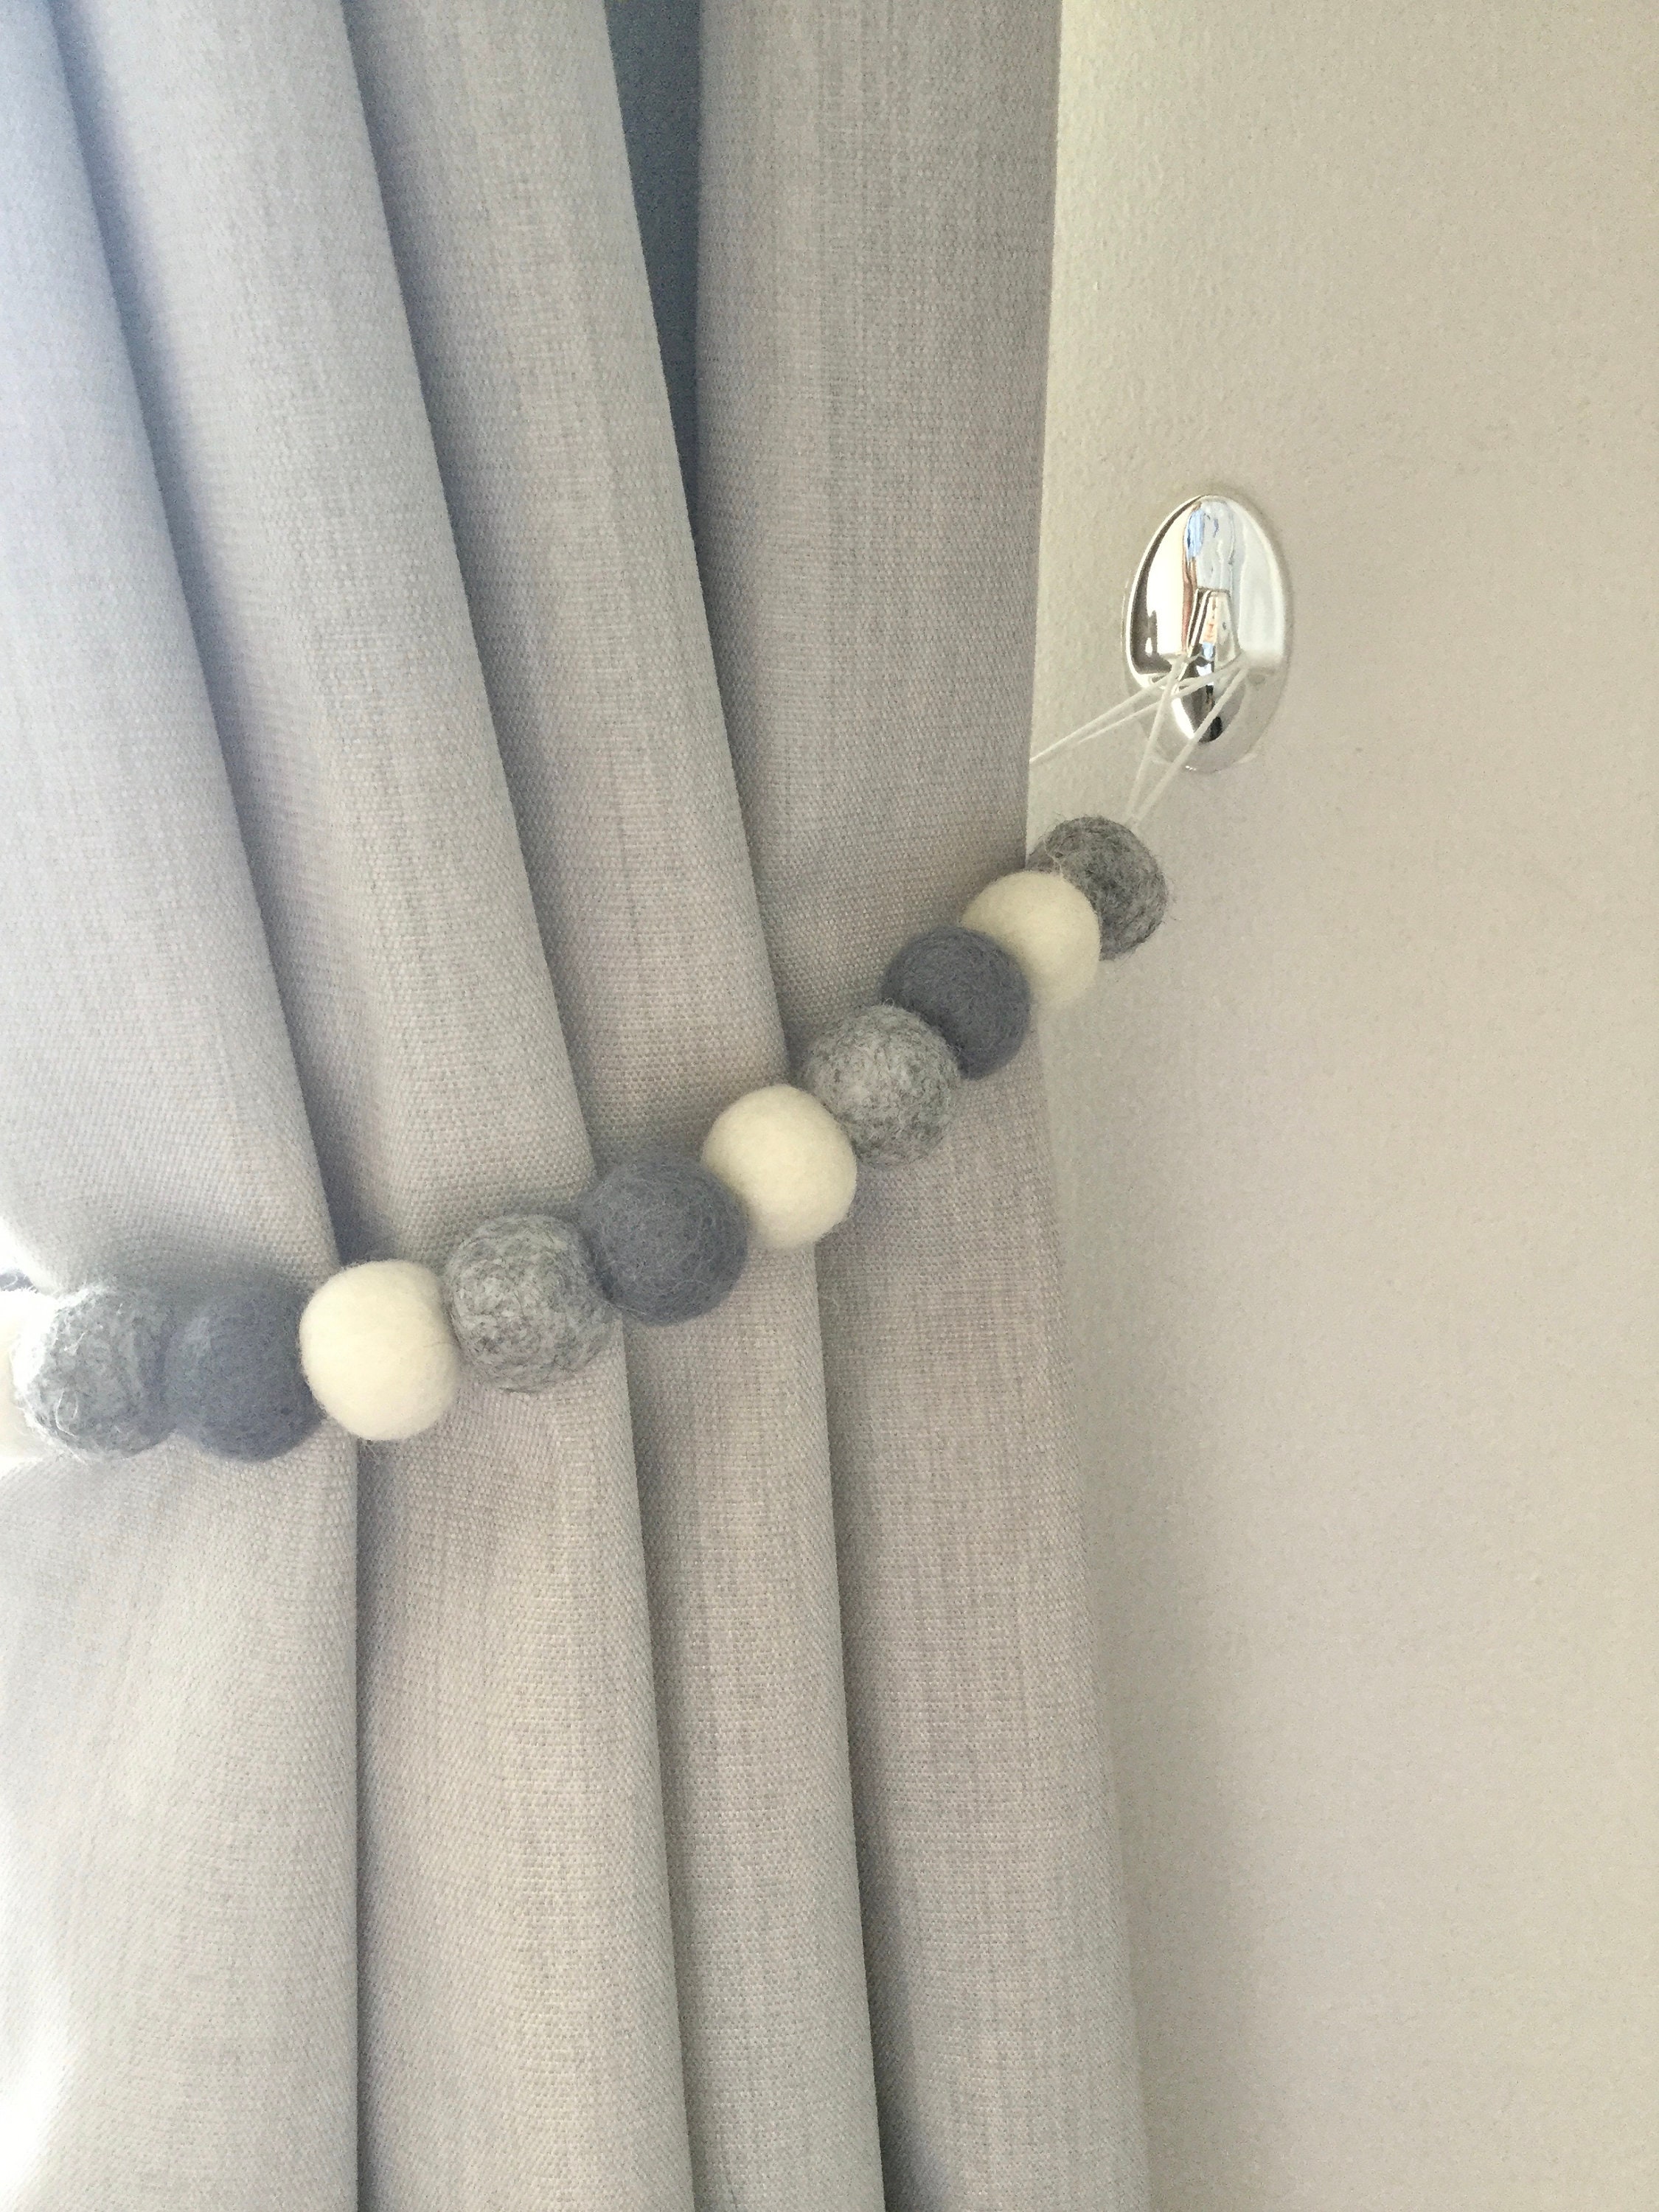 Magnetic Curtain Holders, Magnetic Clips and Tie Backs, Housewarming Gift,  Curtain Tiebacks, Curtain Pulls, Silver 20cm pack of 2 